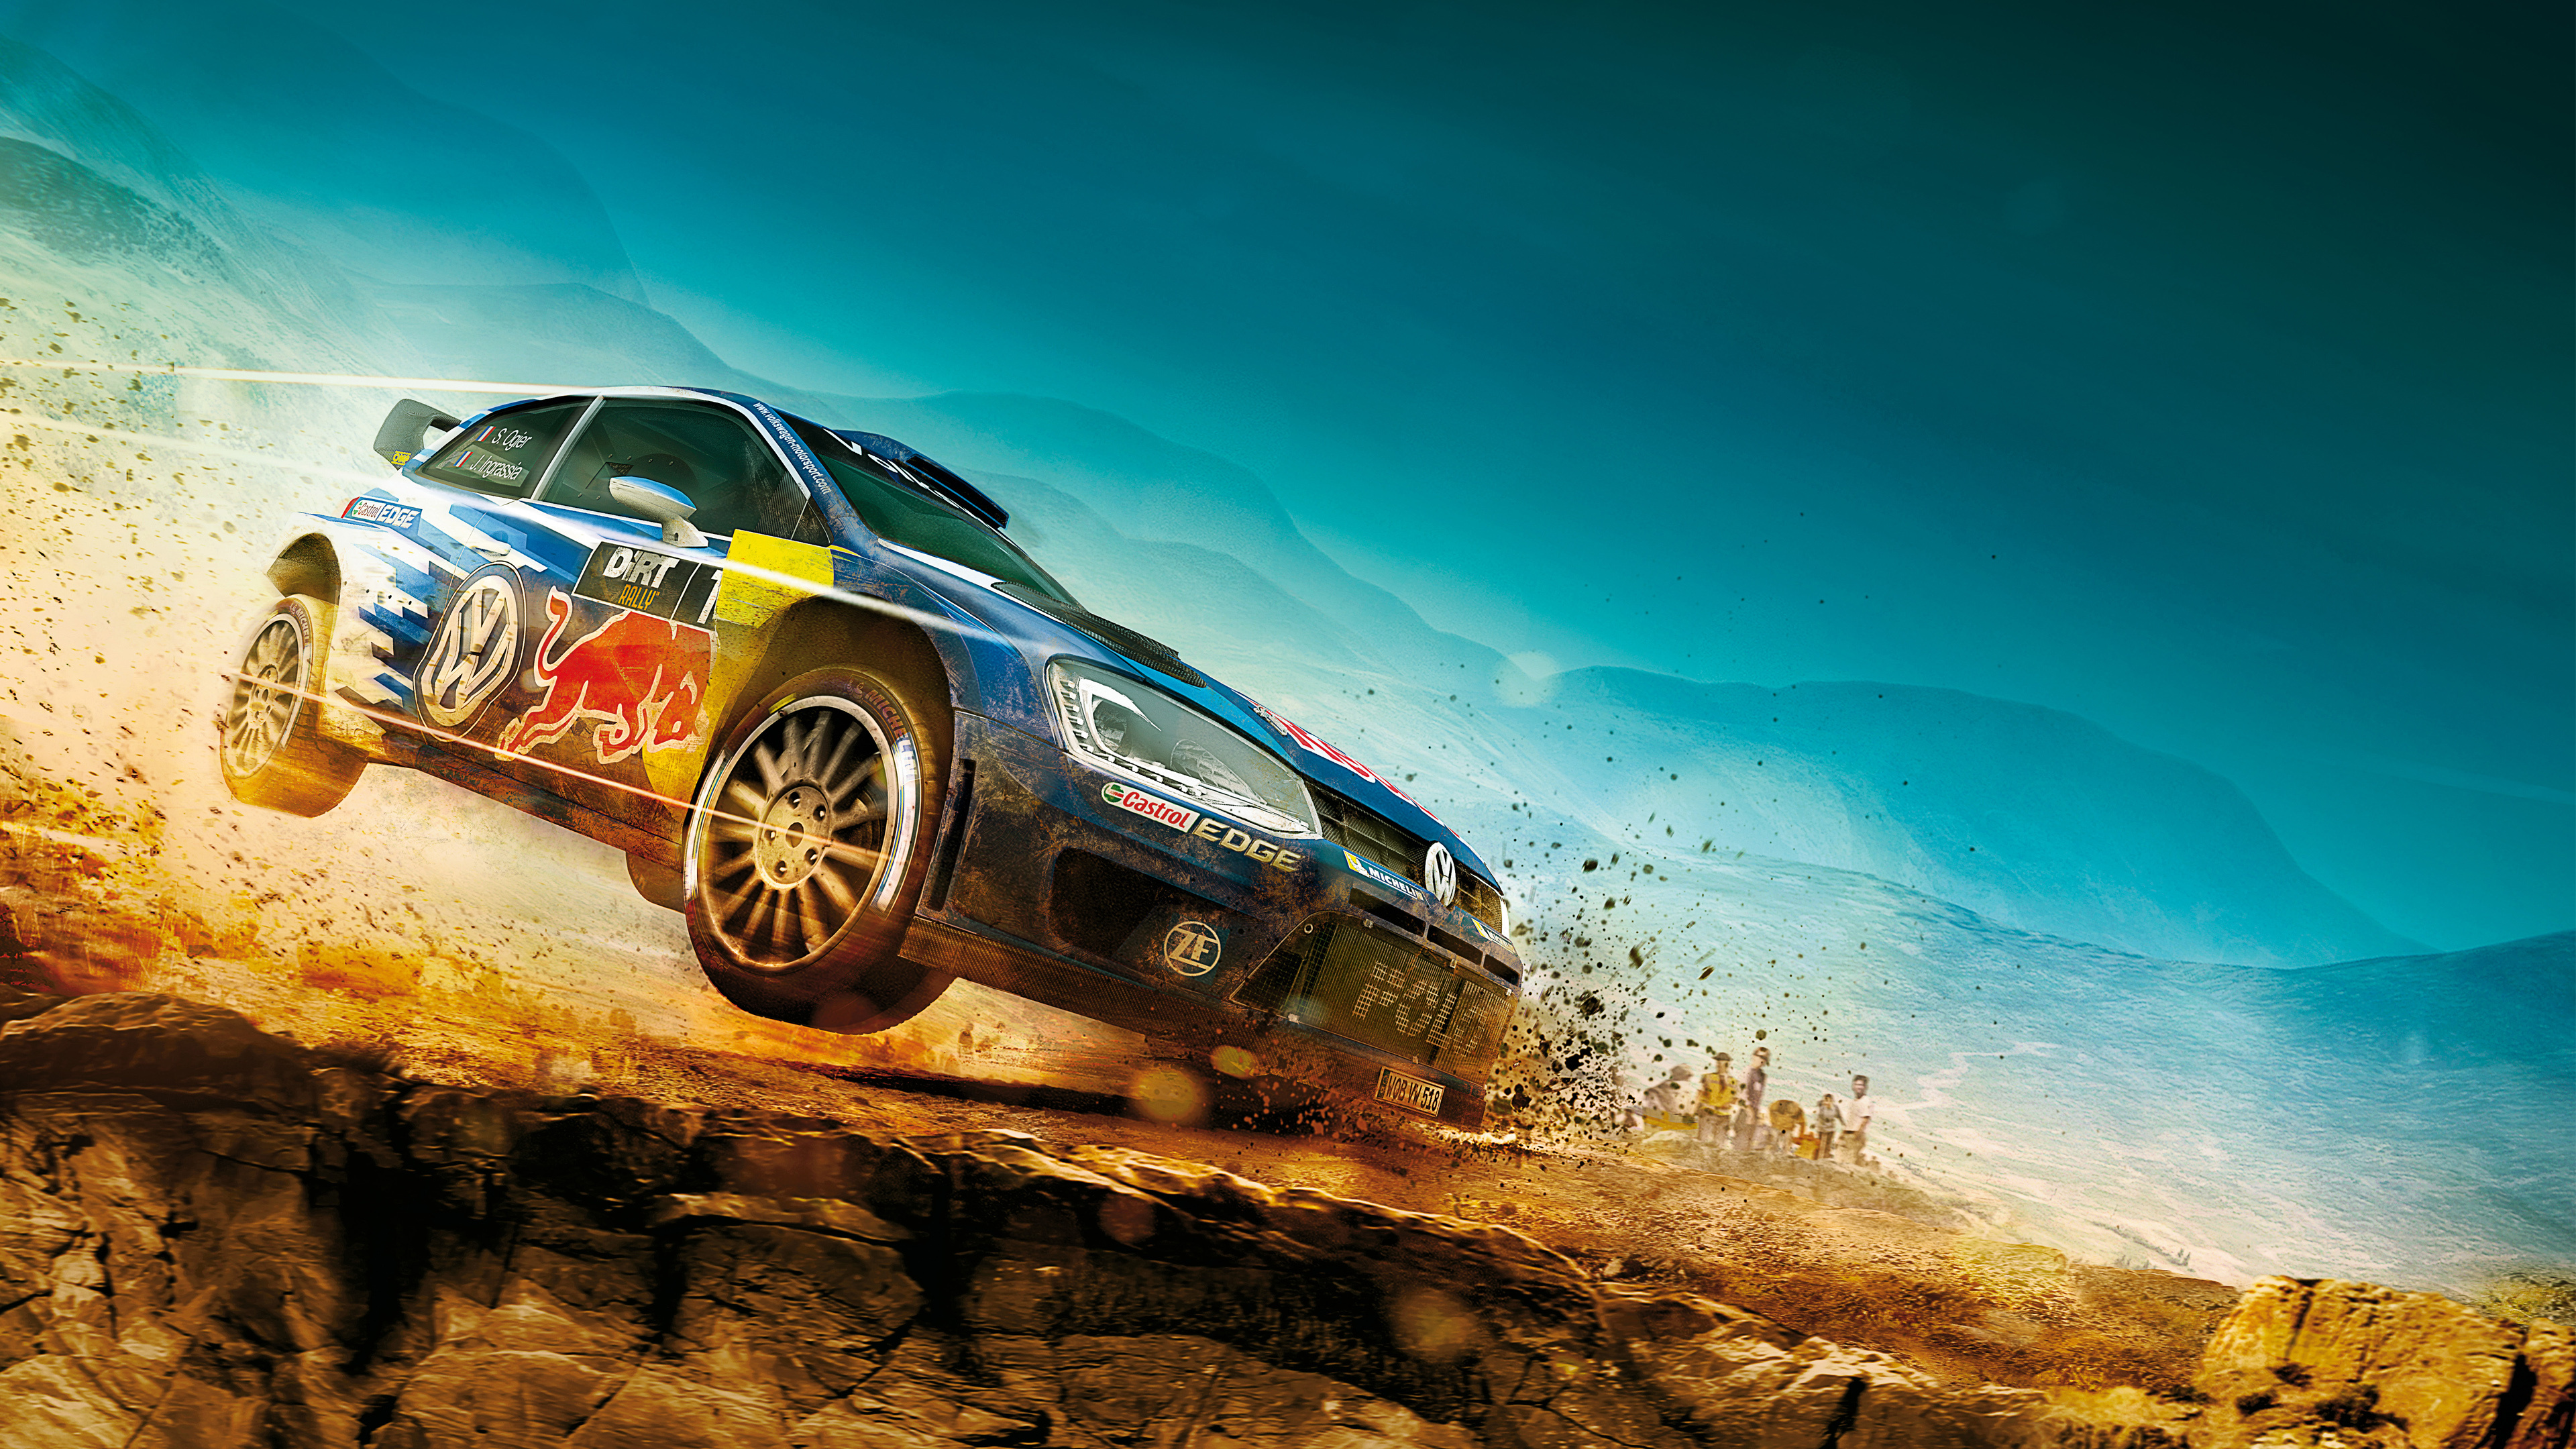 Rallycross: Dirt Race, High-Speed Race in Extreme Conditions, Desert, Volkswagen Polo. 3840x2160 4K Background.